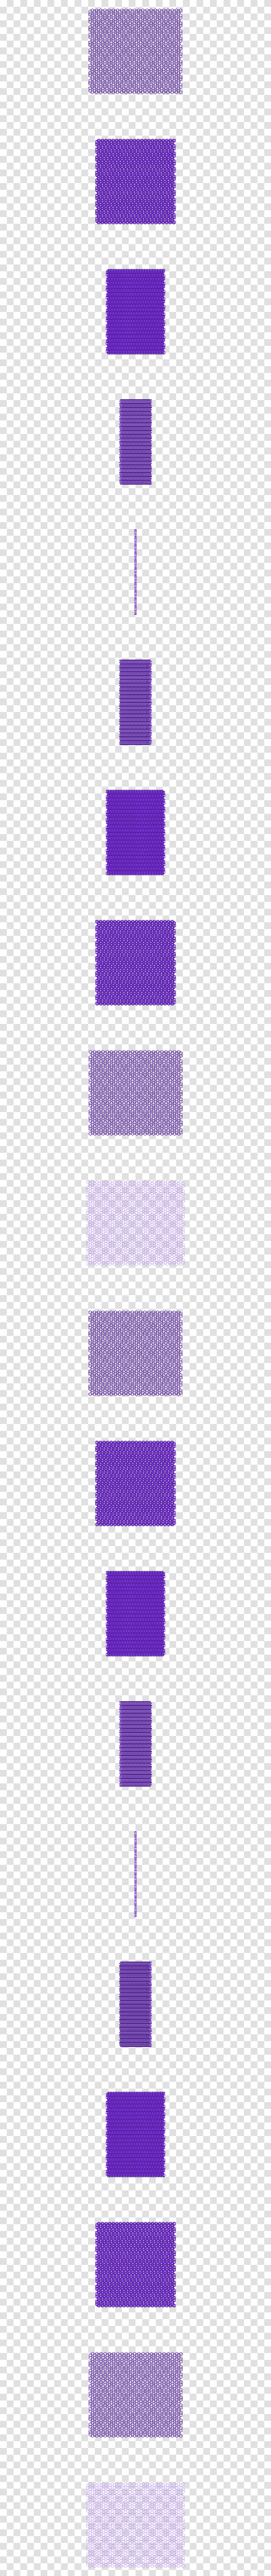 Chain Mail, Armor Transparent Png